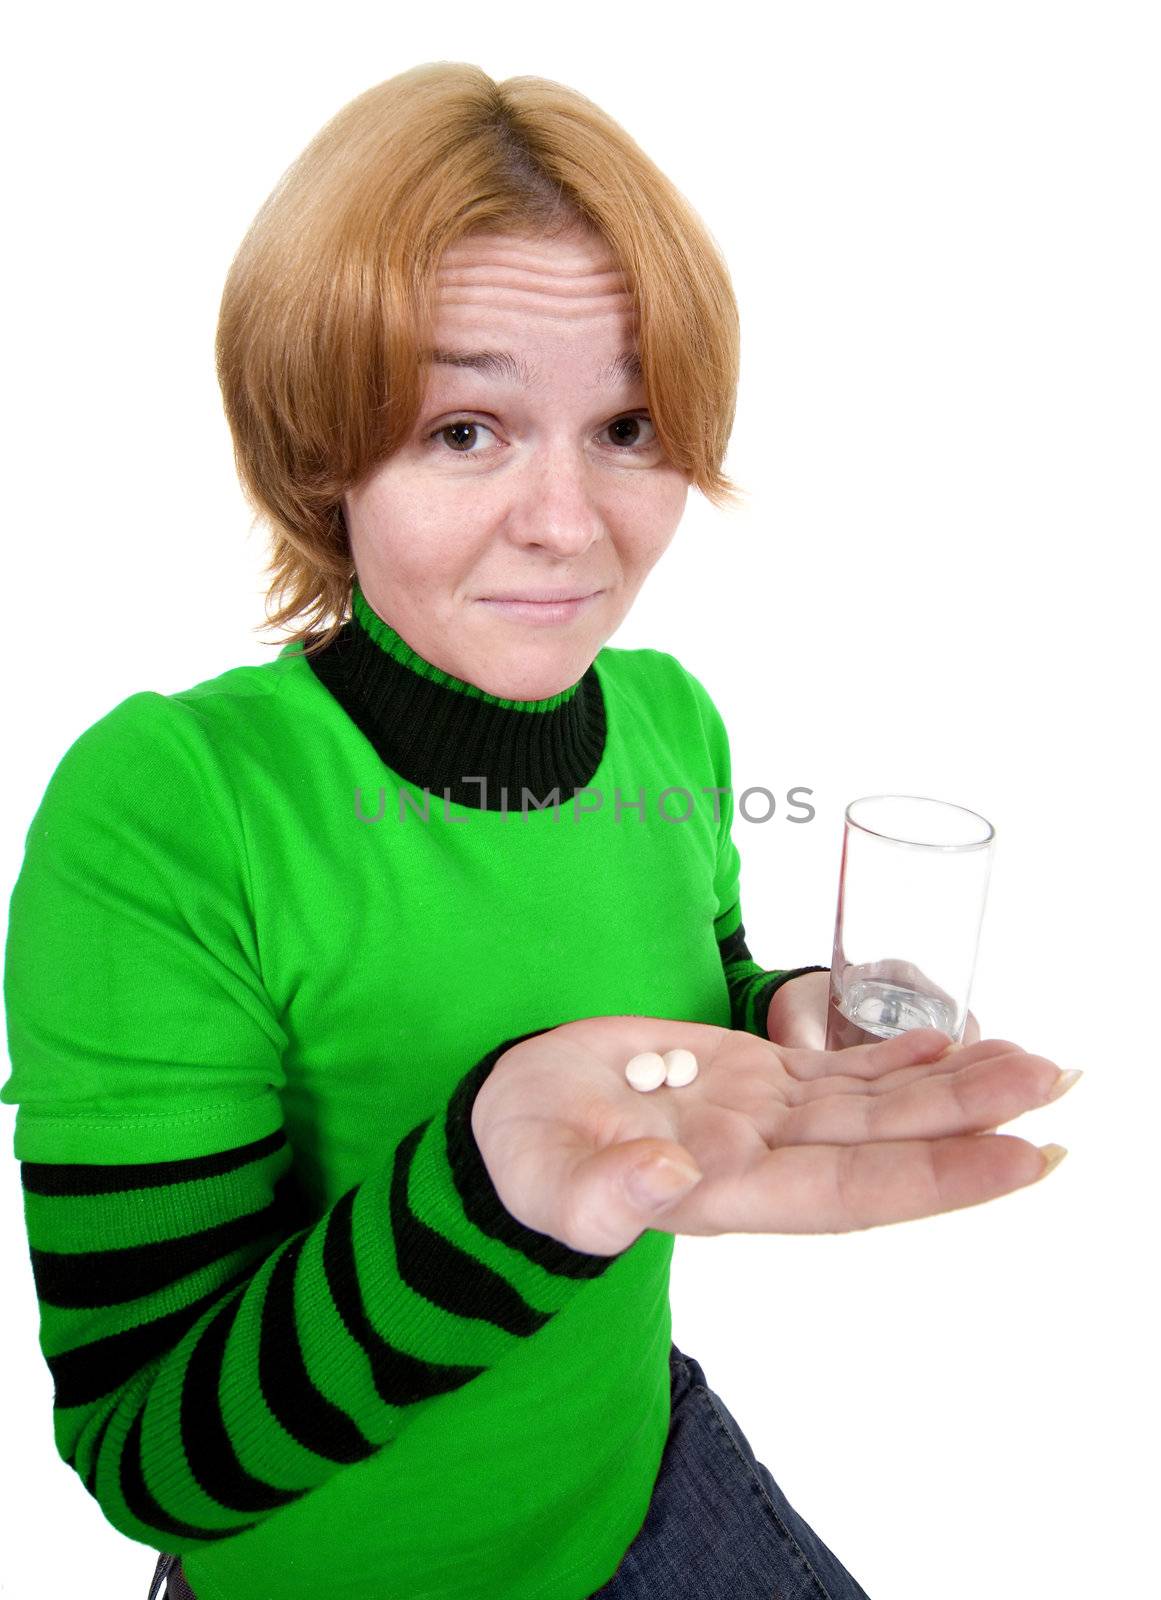 The girl with a glass and tablets on a white background